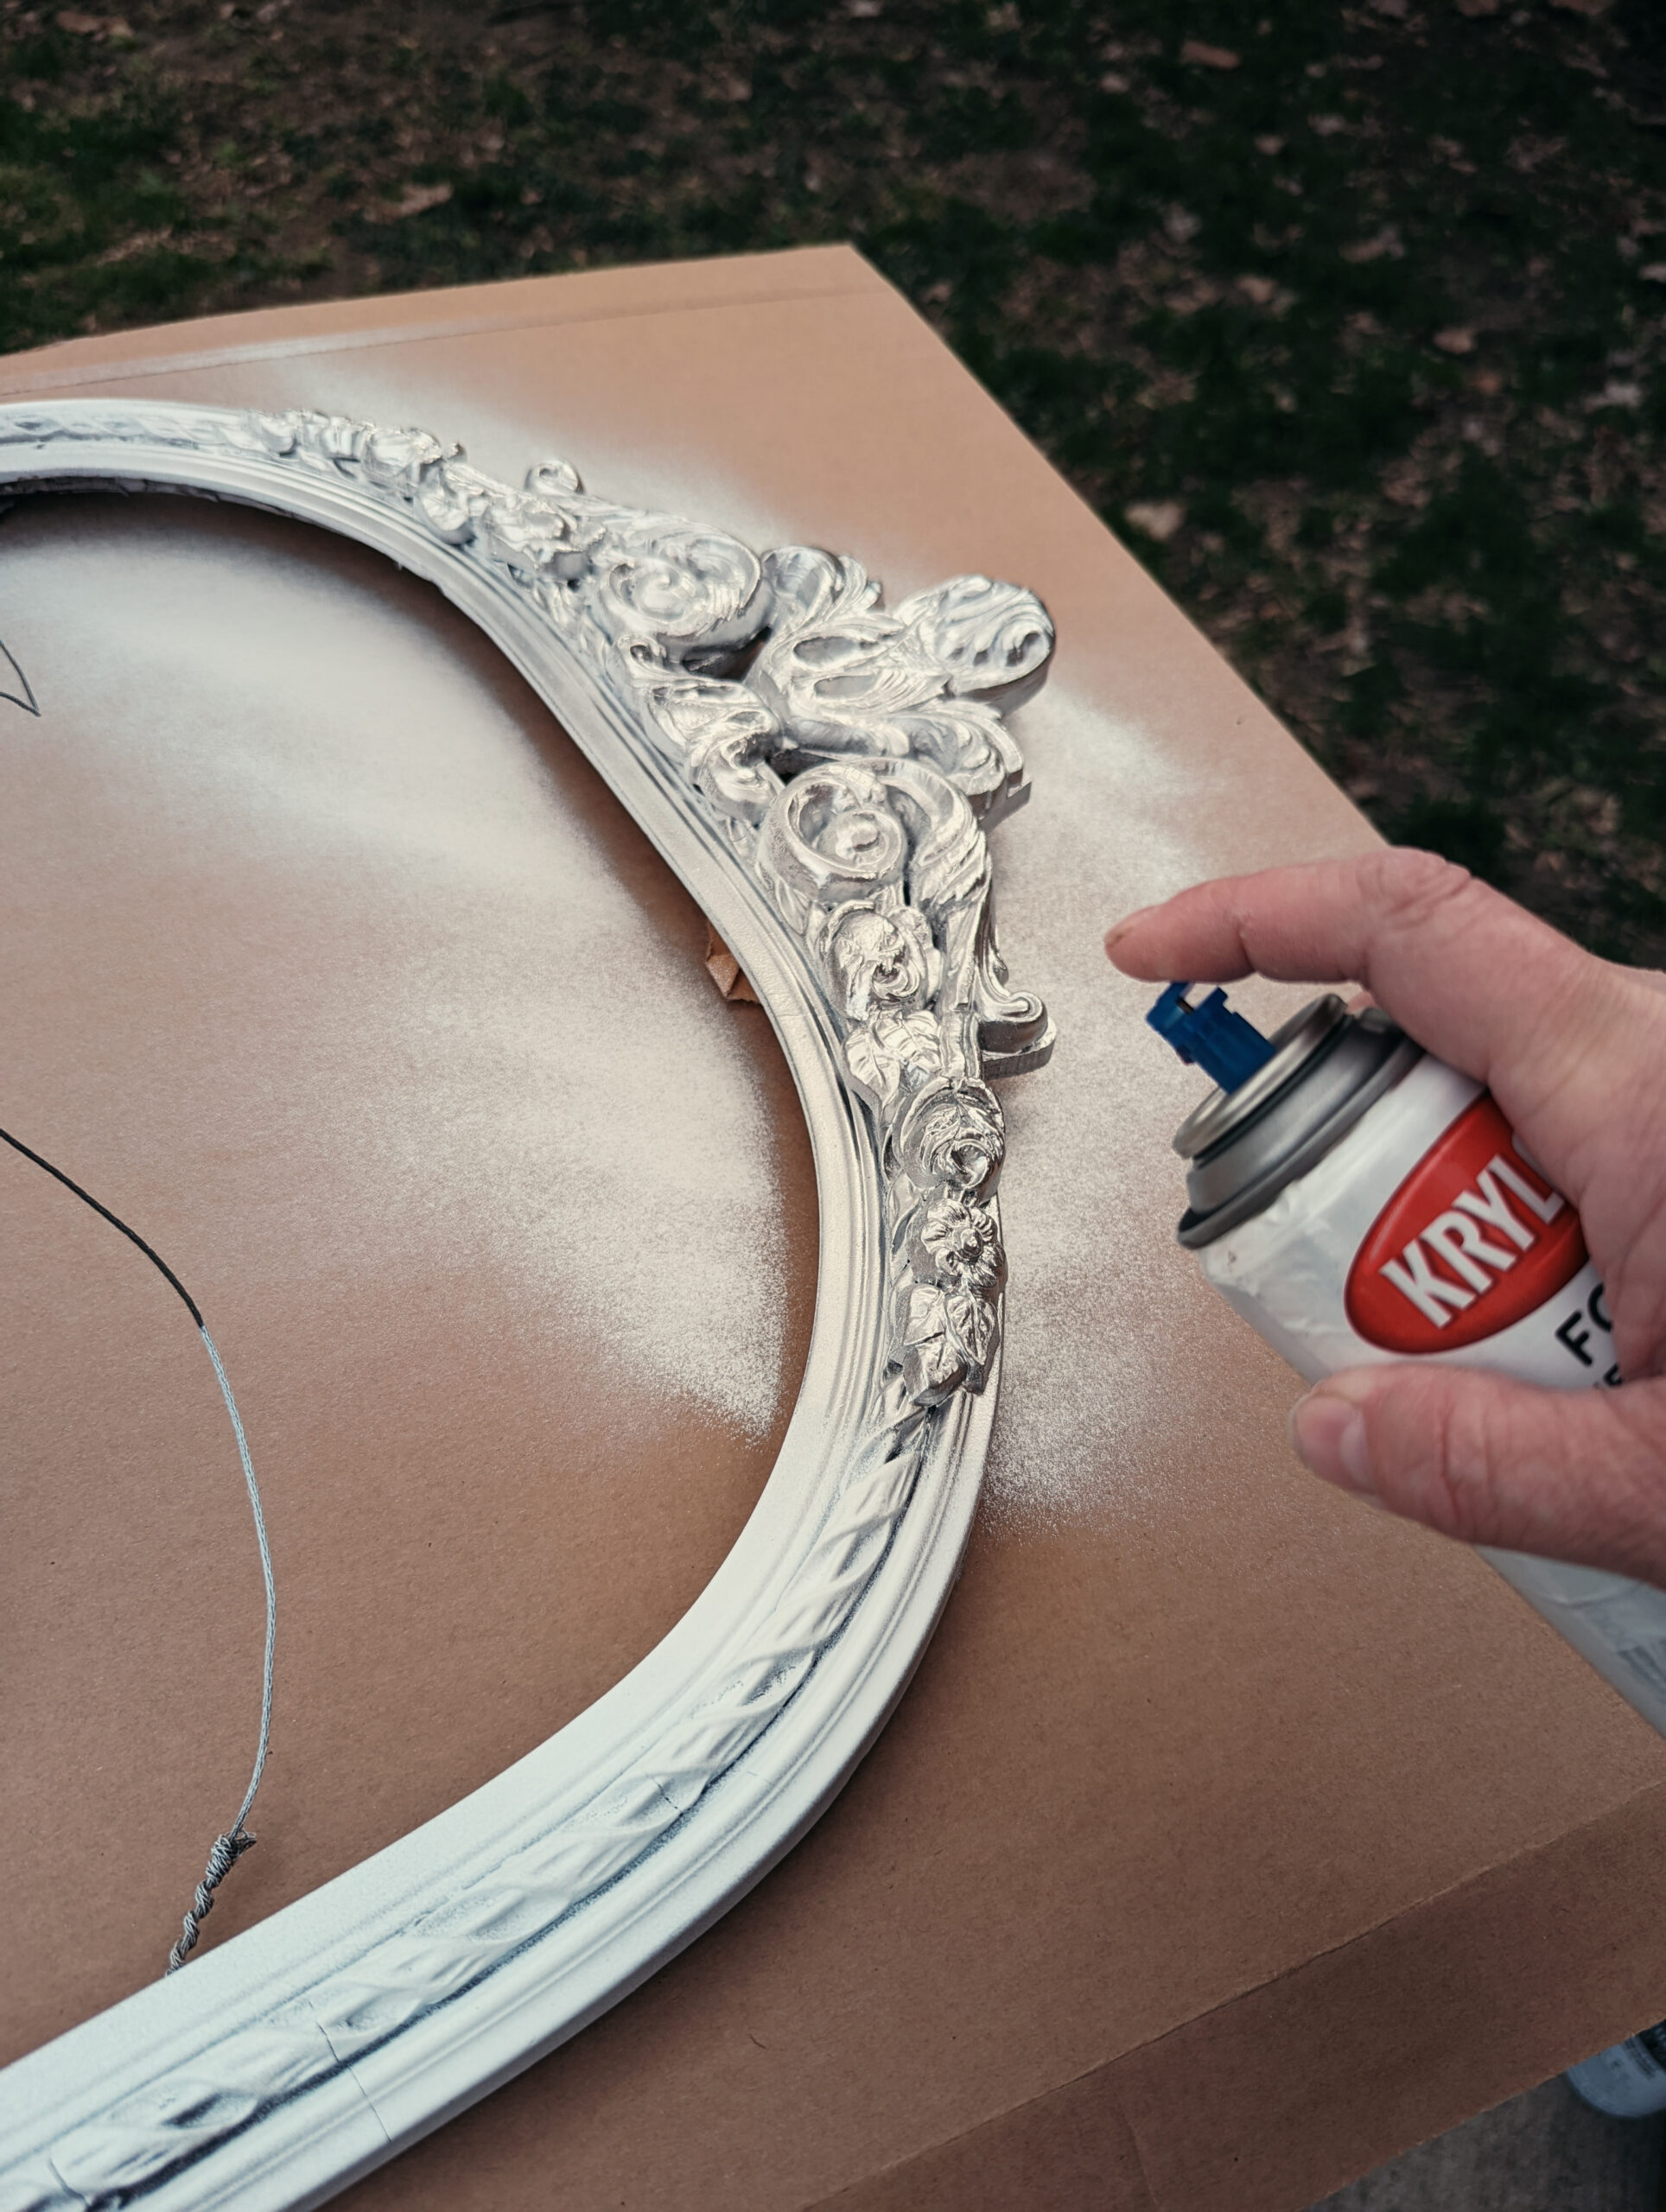 A frame being painted with an antique silver finish.